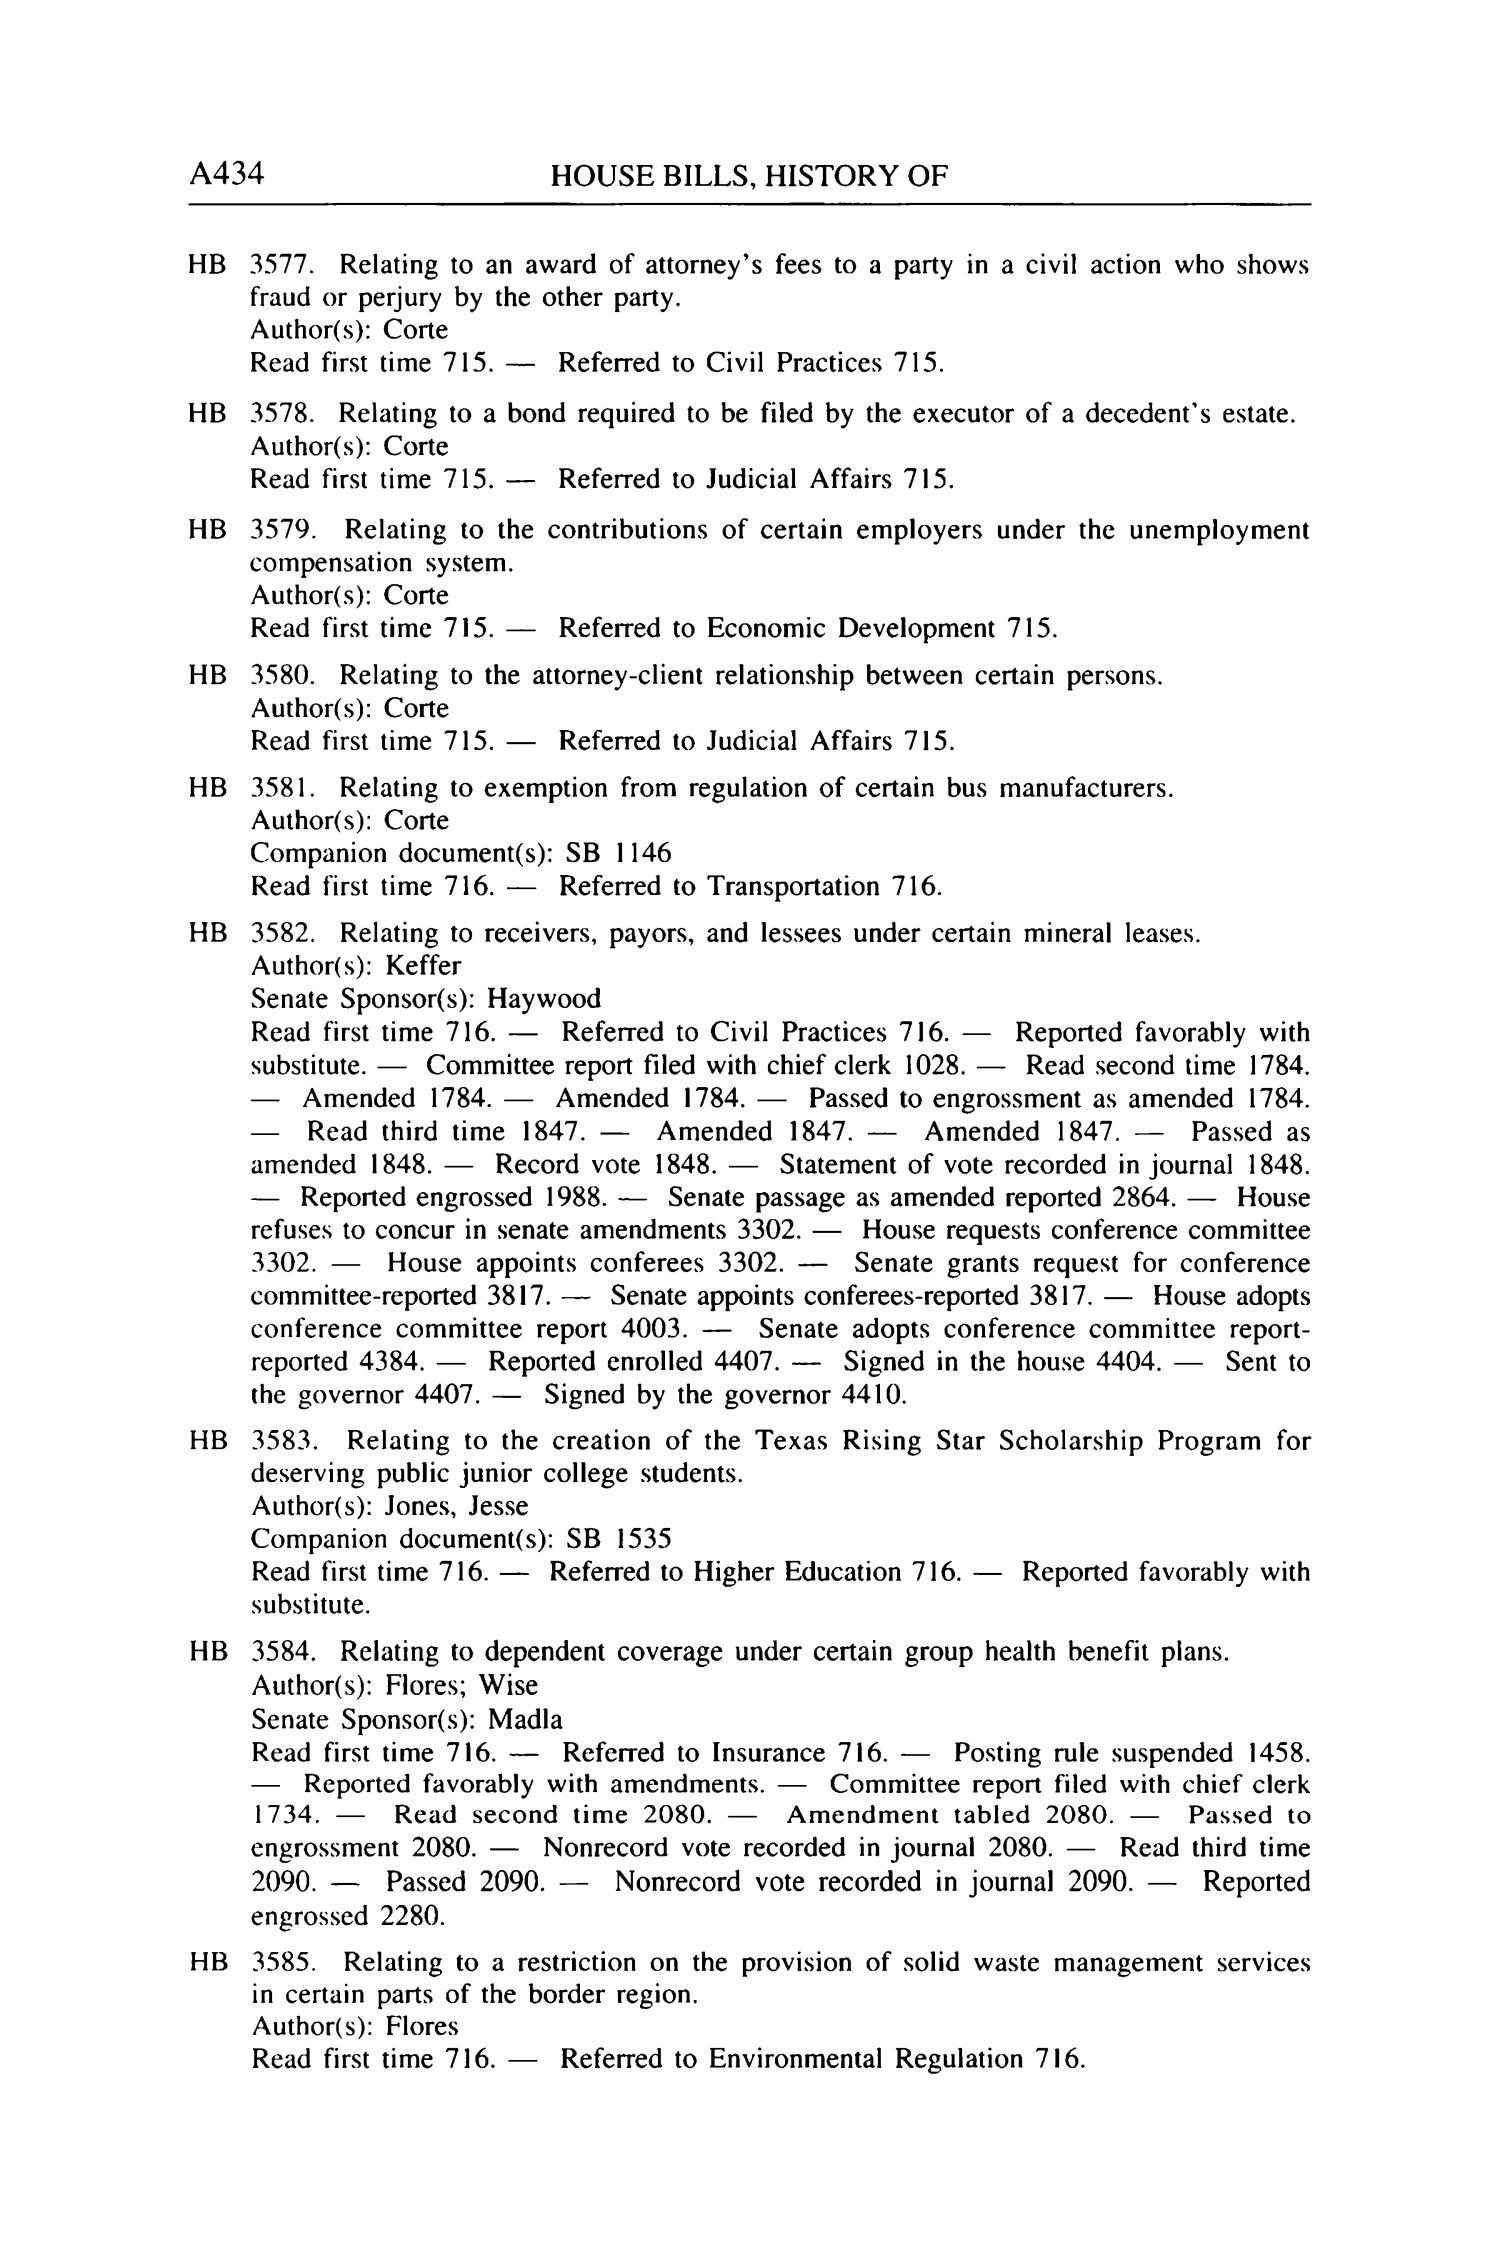 Journal of the House of Representatives of the Regular Session of the Seventy-Sixth Legislature of the State of Texas, Volume 5
                                                
                                                    A434
                                                